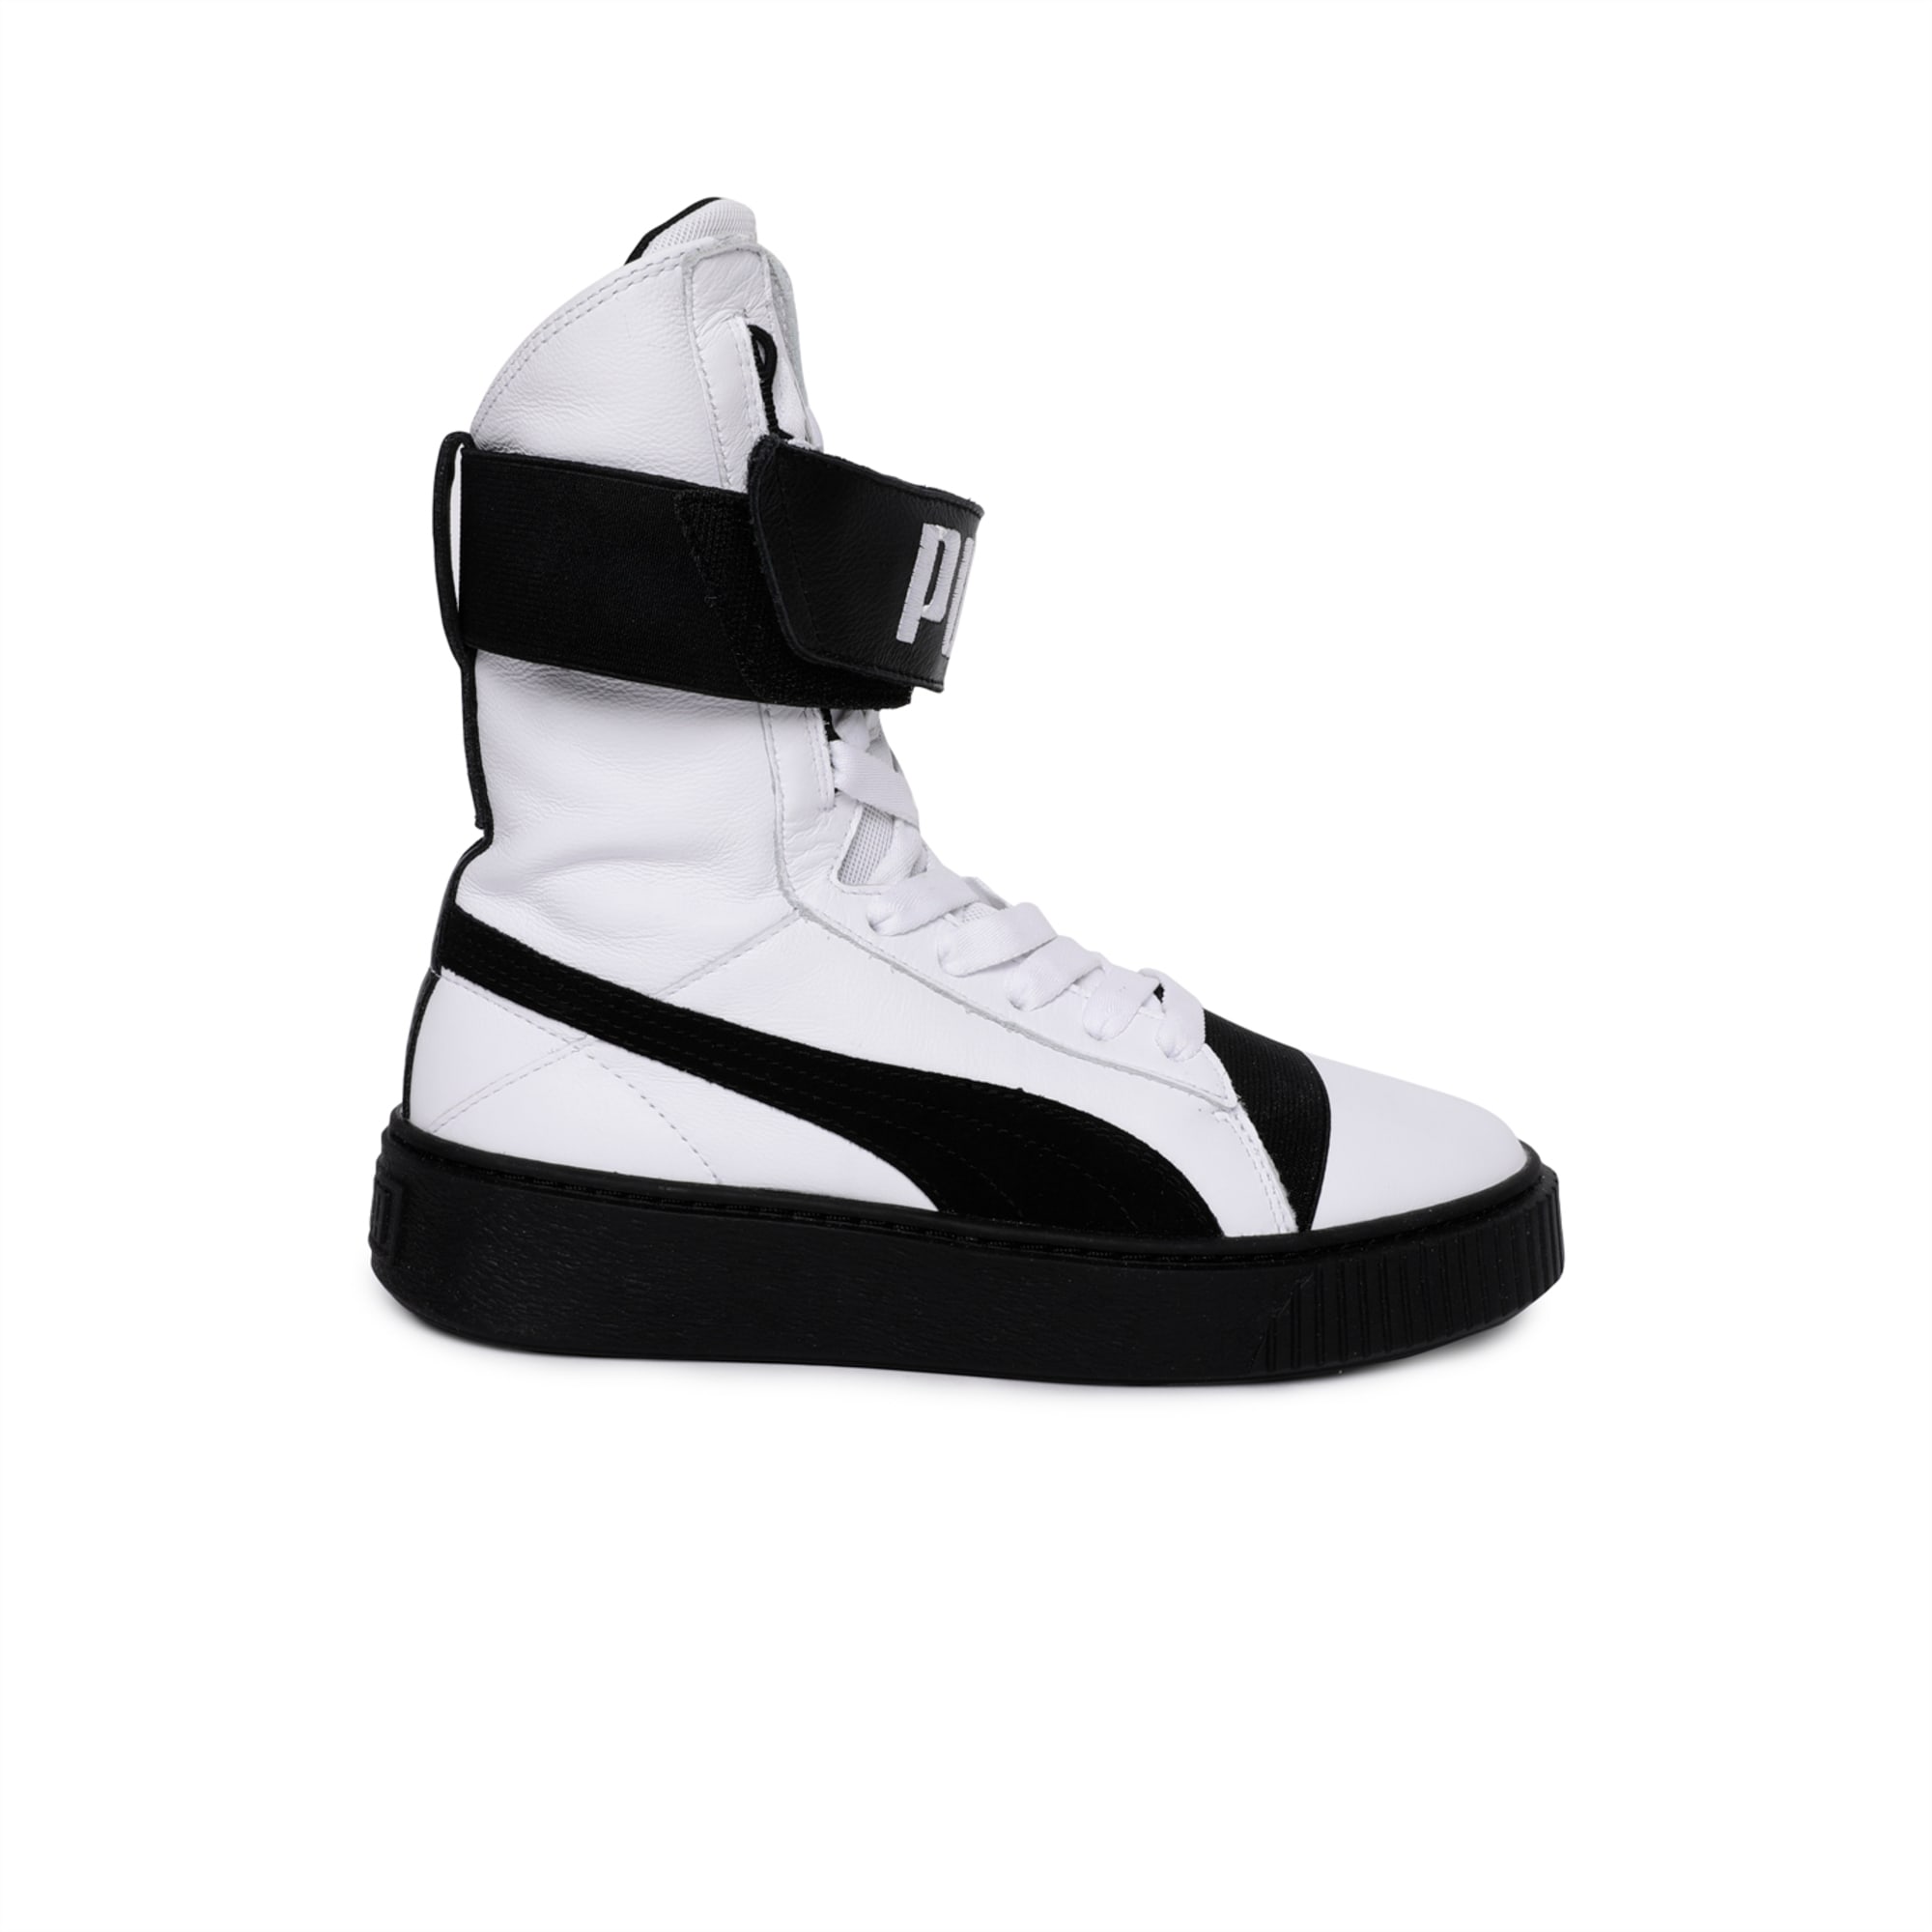 puma boots for women